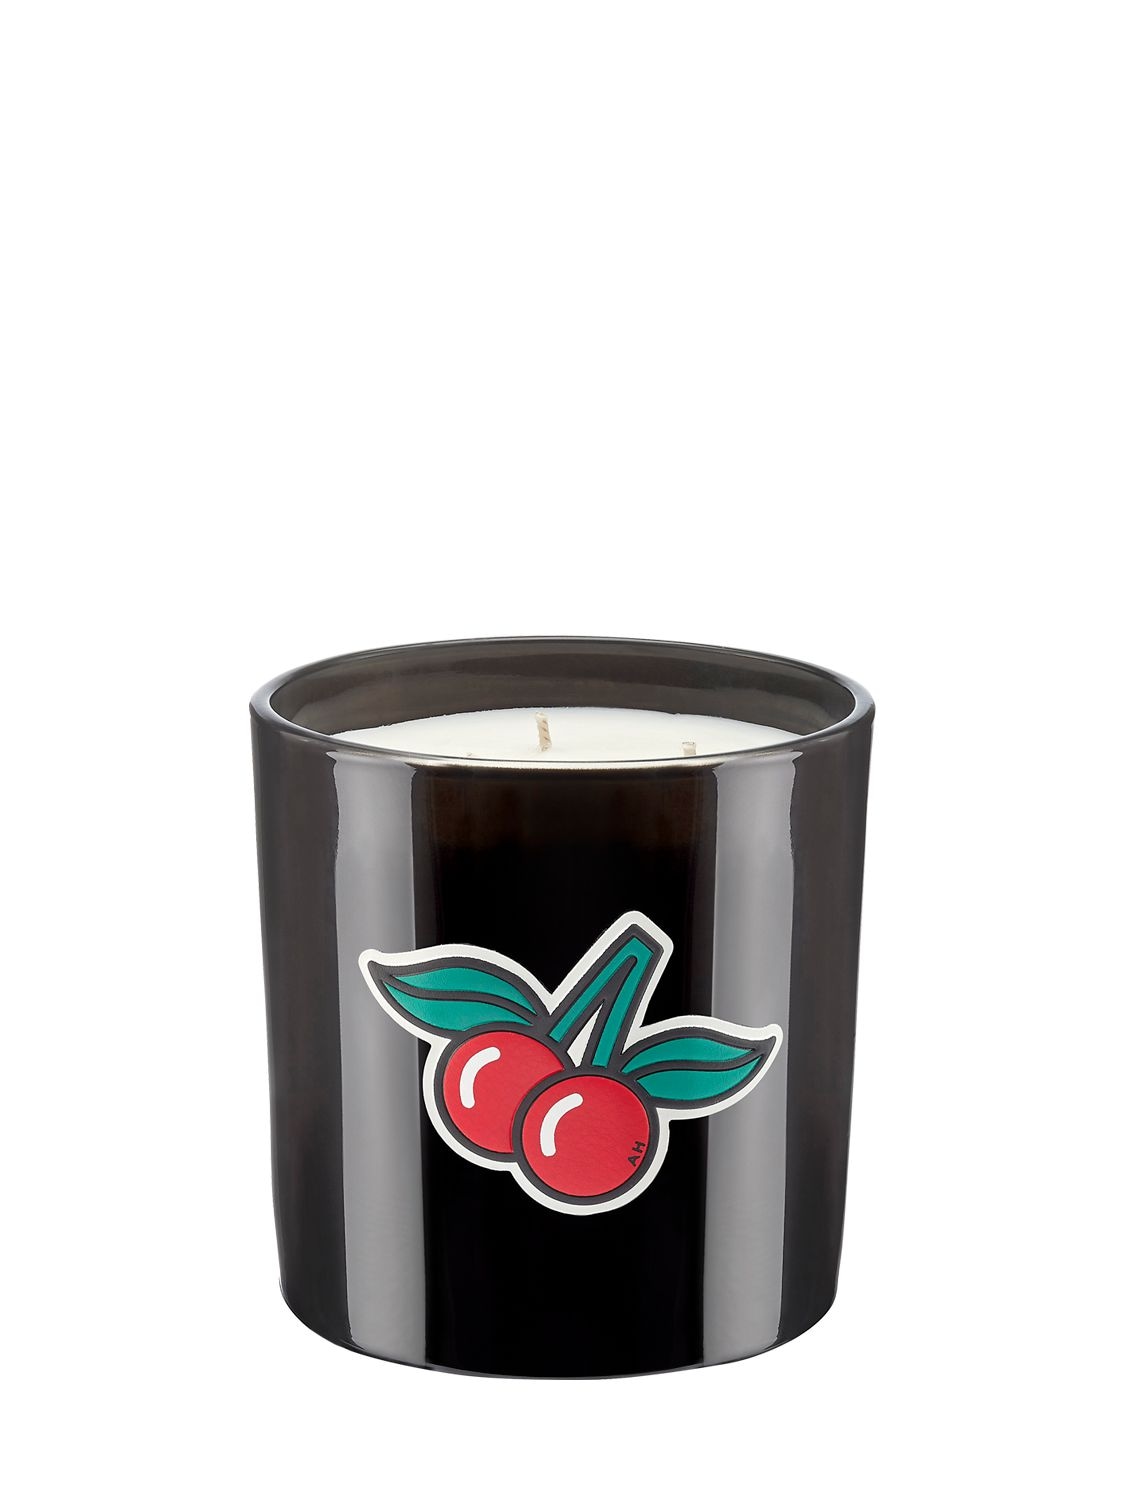 Anya Hindmarch Smells 700gr Lip Balm Scented Candle In Black